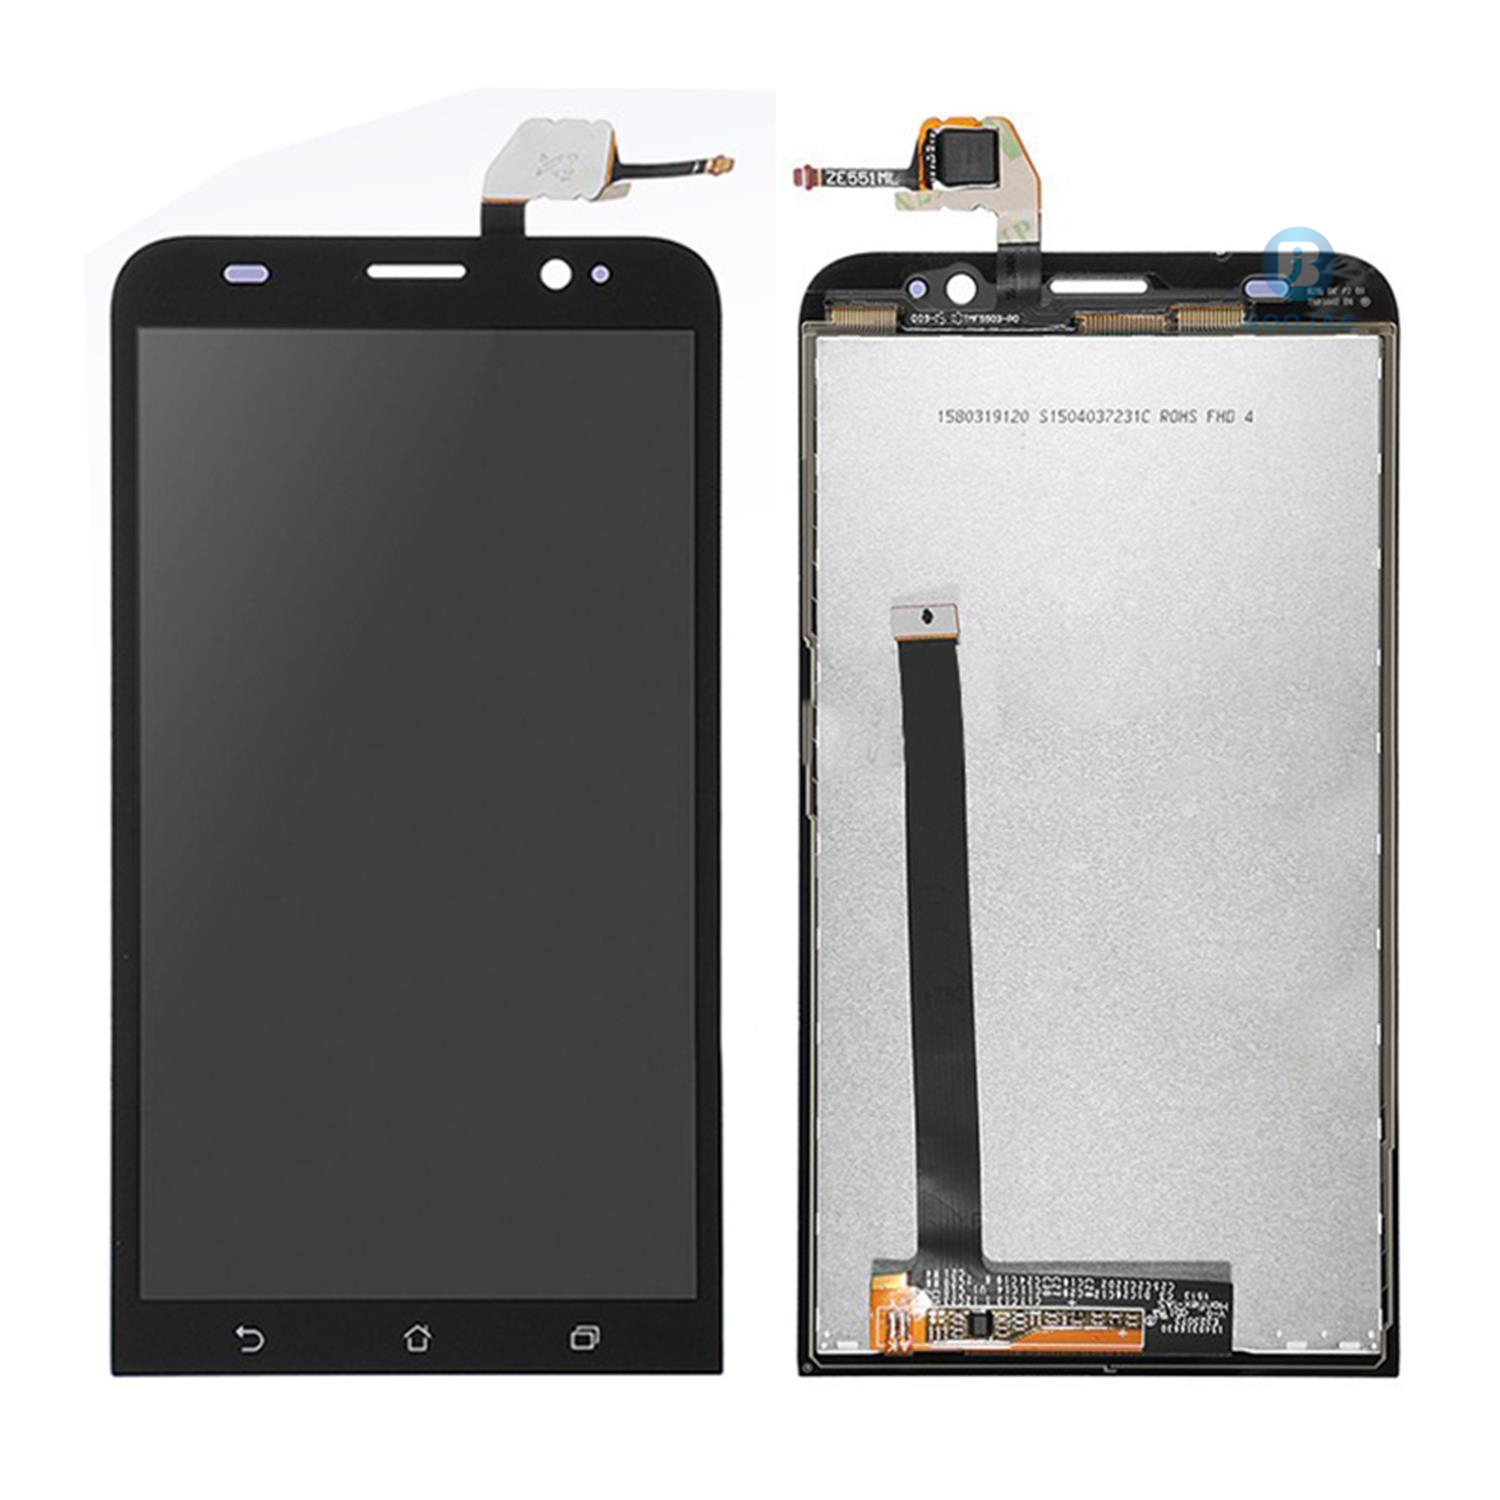 For Asus Zenfone ZE551ML LCD Screen Display and Touch Panel Digitizer Assembly Replacement